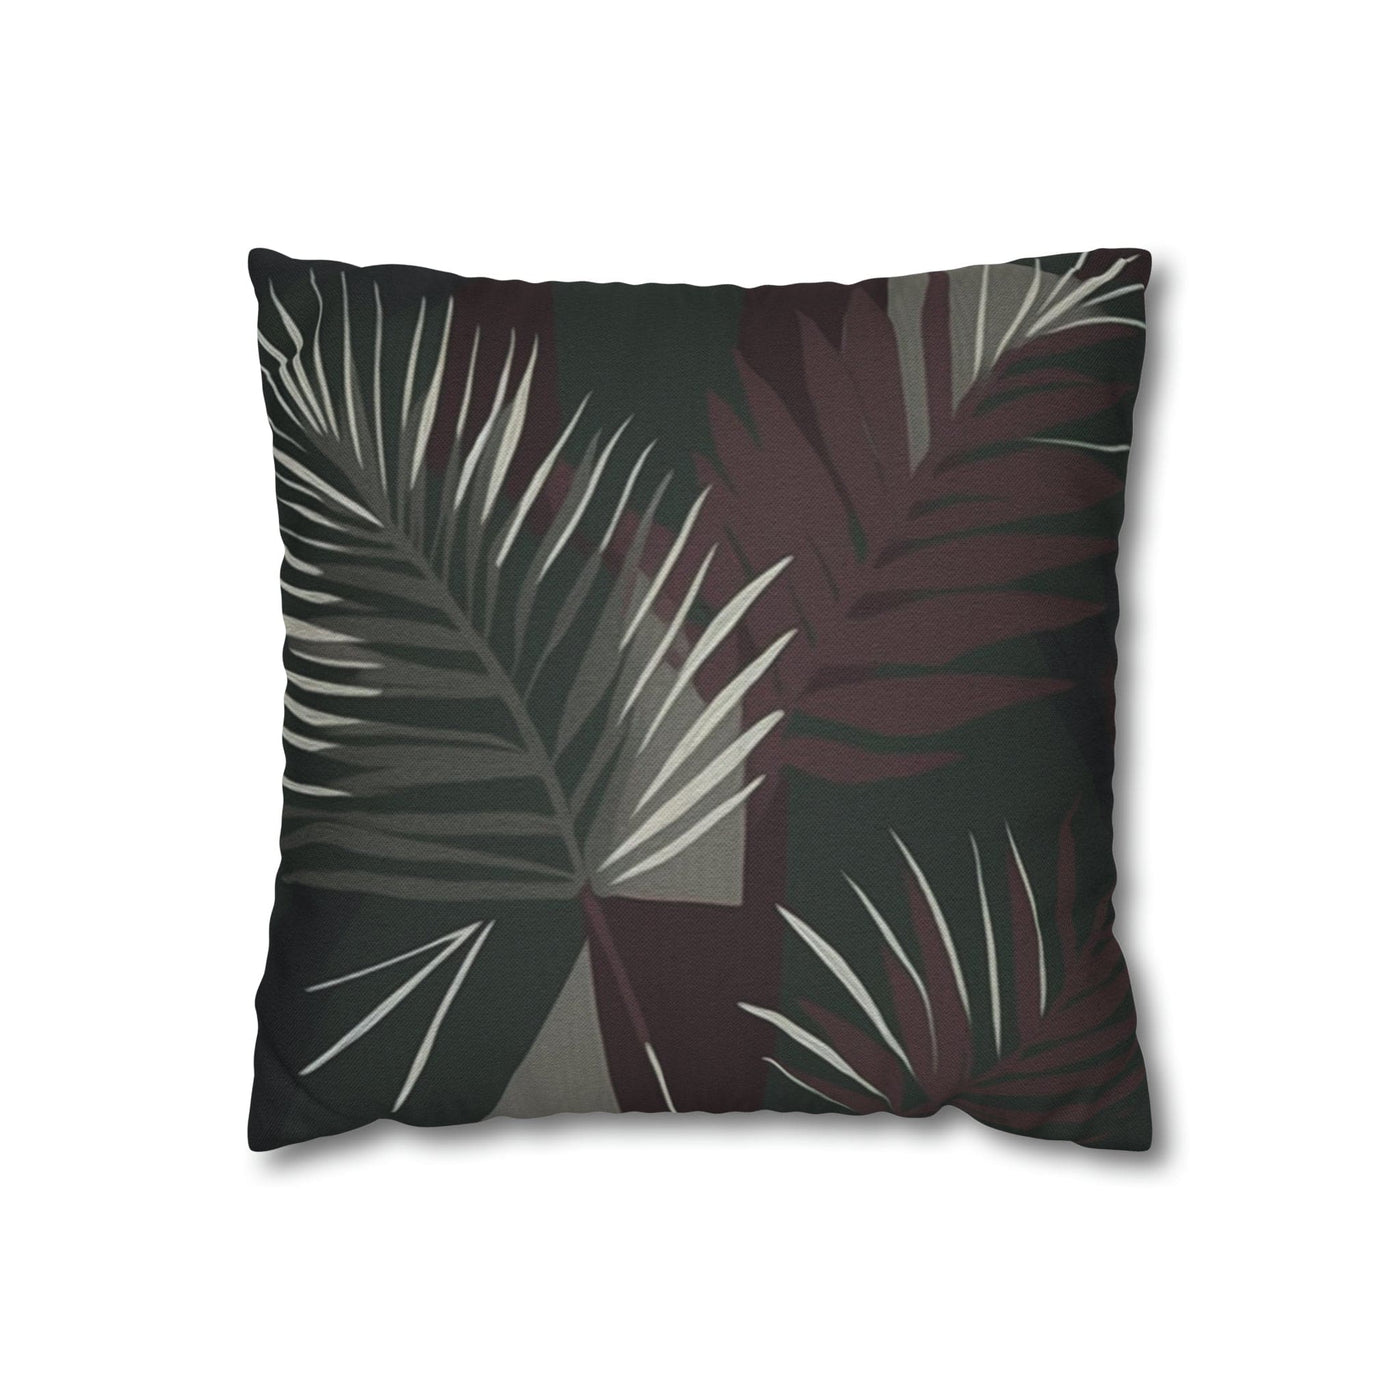 Decorative Throw Pillow Covers With Zipper - Set Of 2 Palm Tree Leaves Maroon